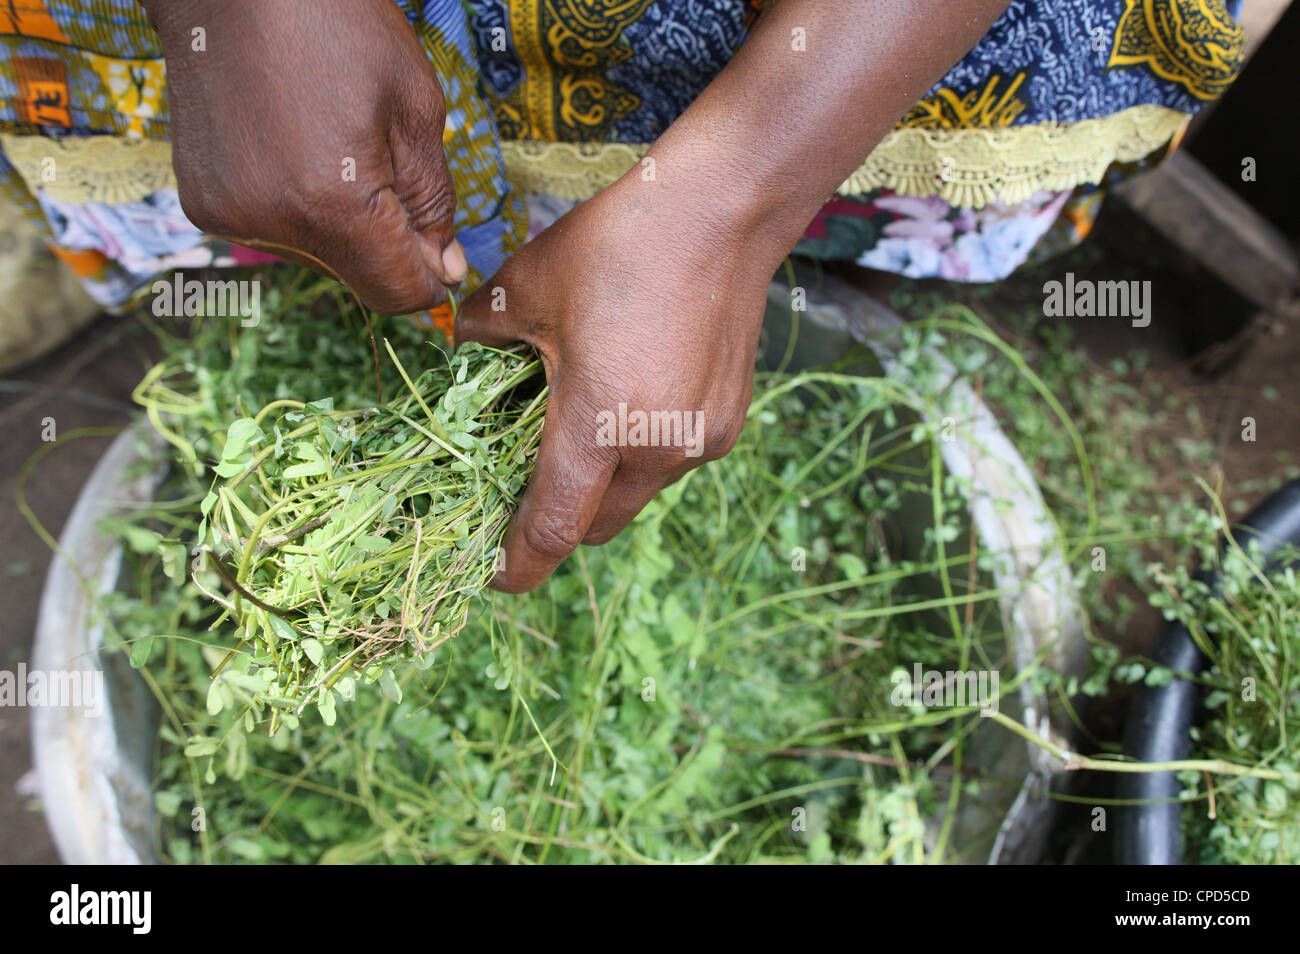 Herbal medicine, Lome, Togo, West Africa, Africa Stock Photo